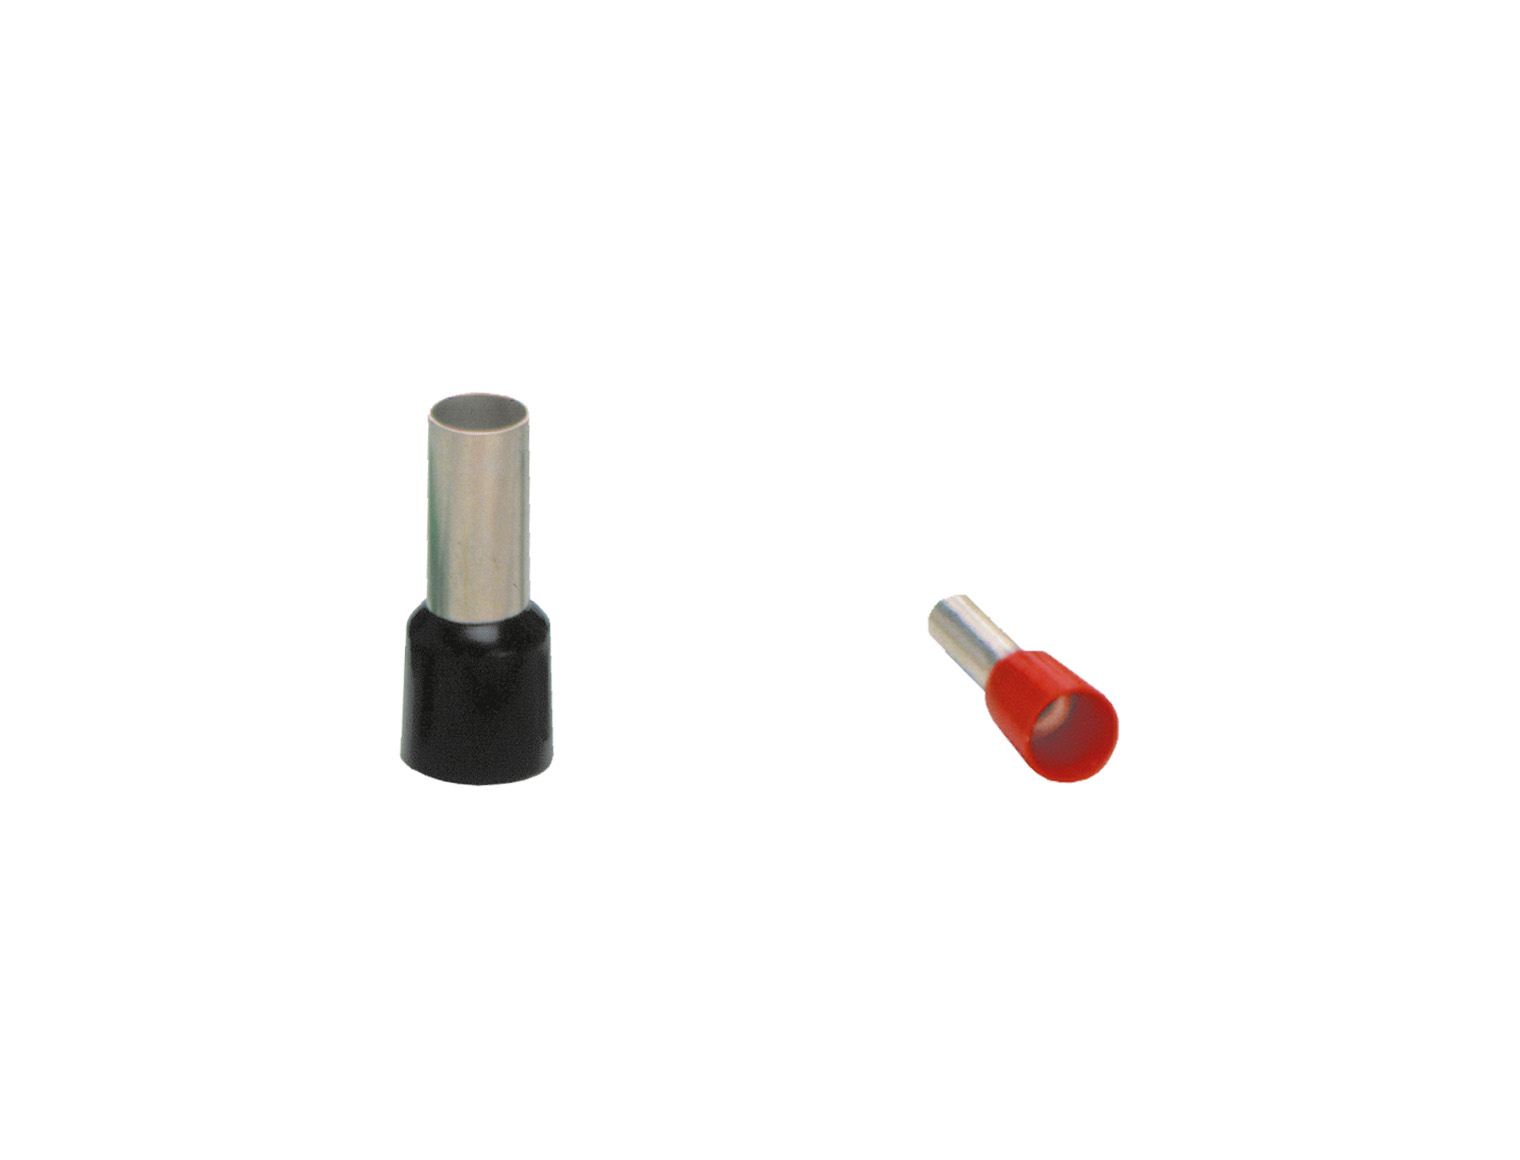 ADI-K core end sleeves - for short-circuit proof wires, insulated